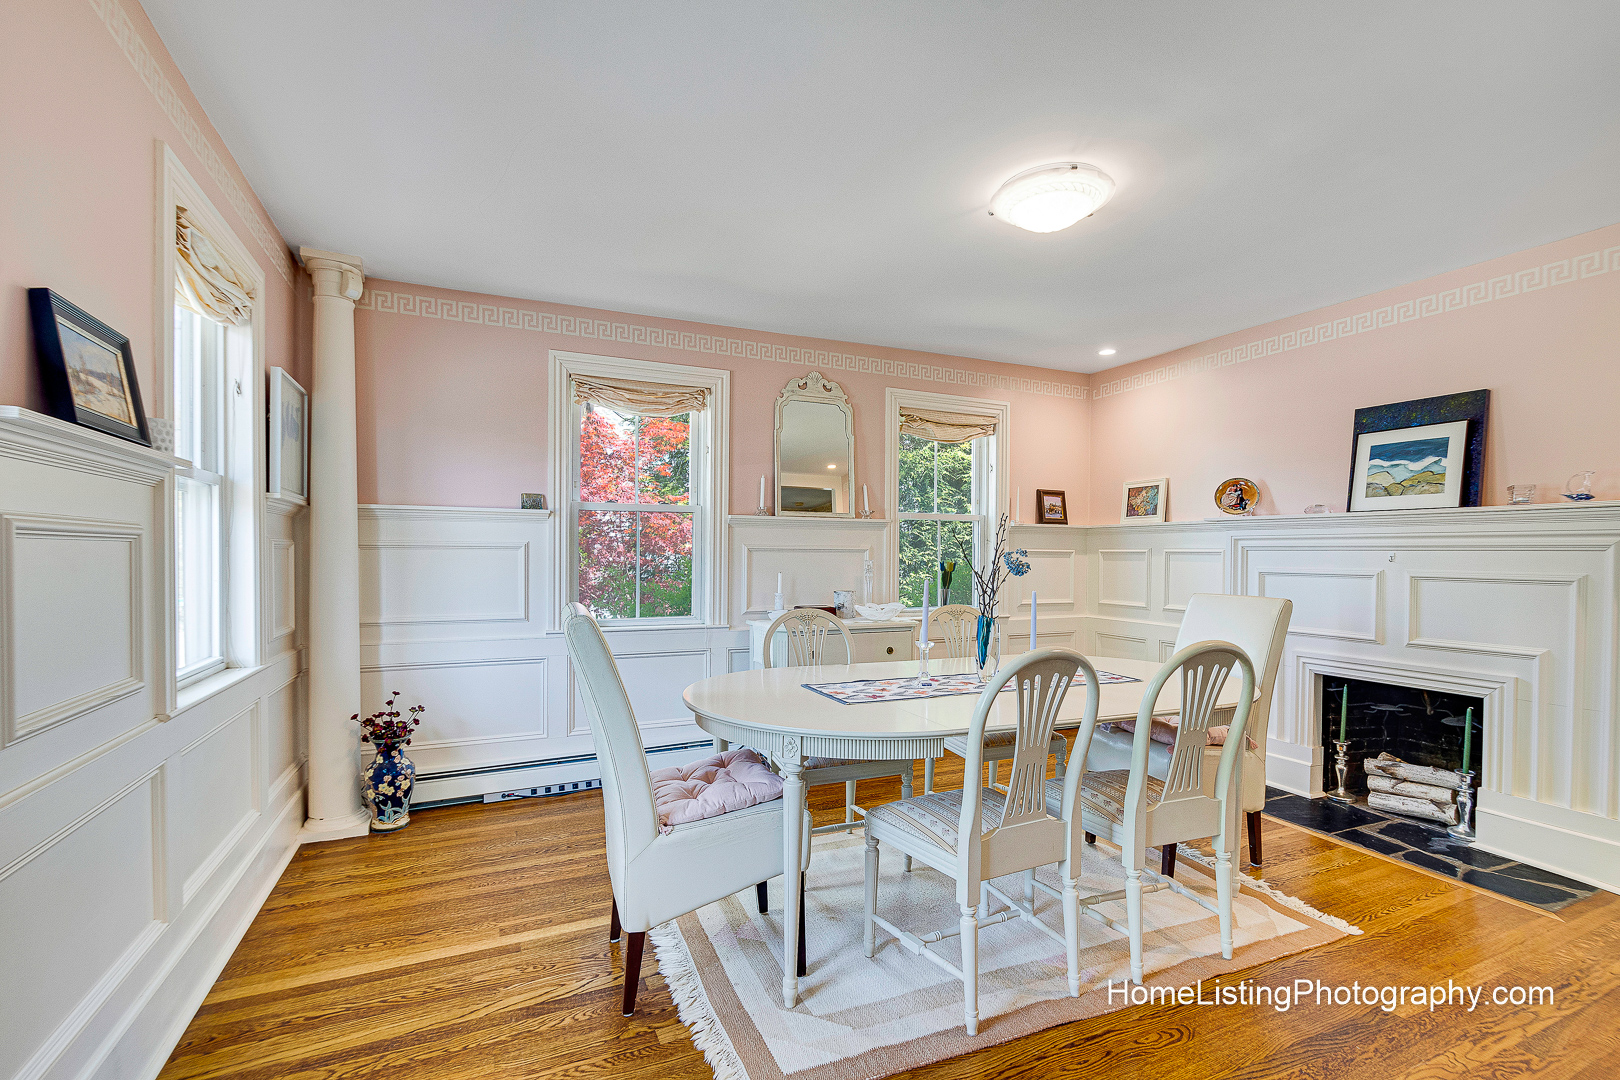 Thomas Adach - Winchester MA professional real estate photographer - 508-655-2225 Home Listing Photography